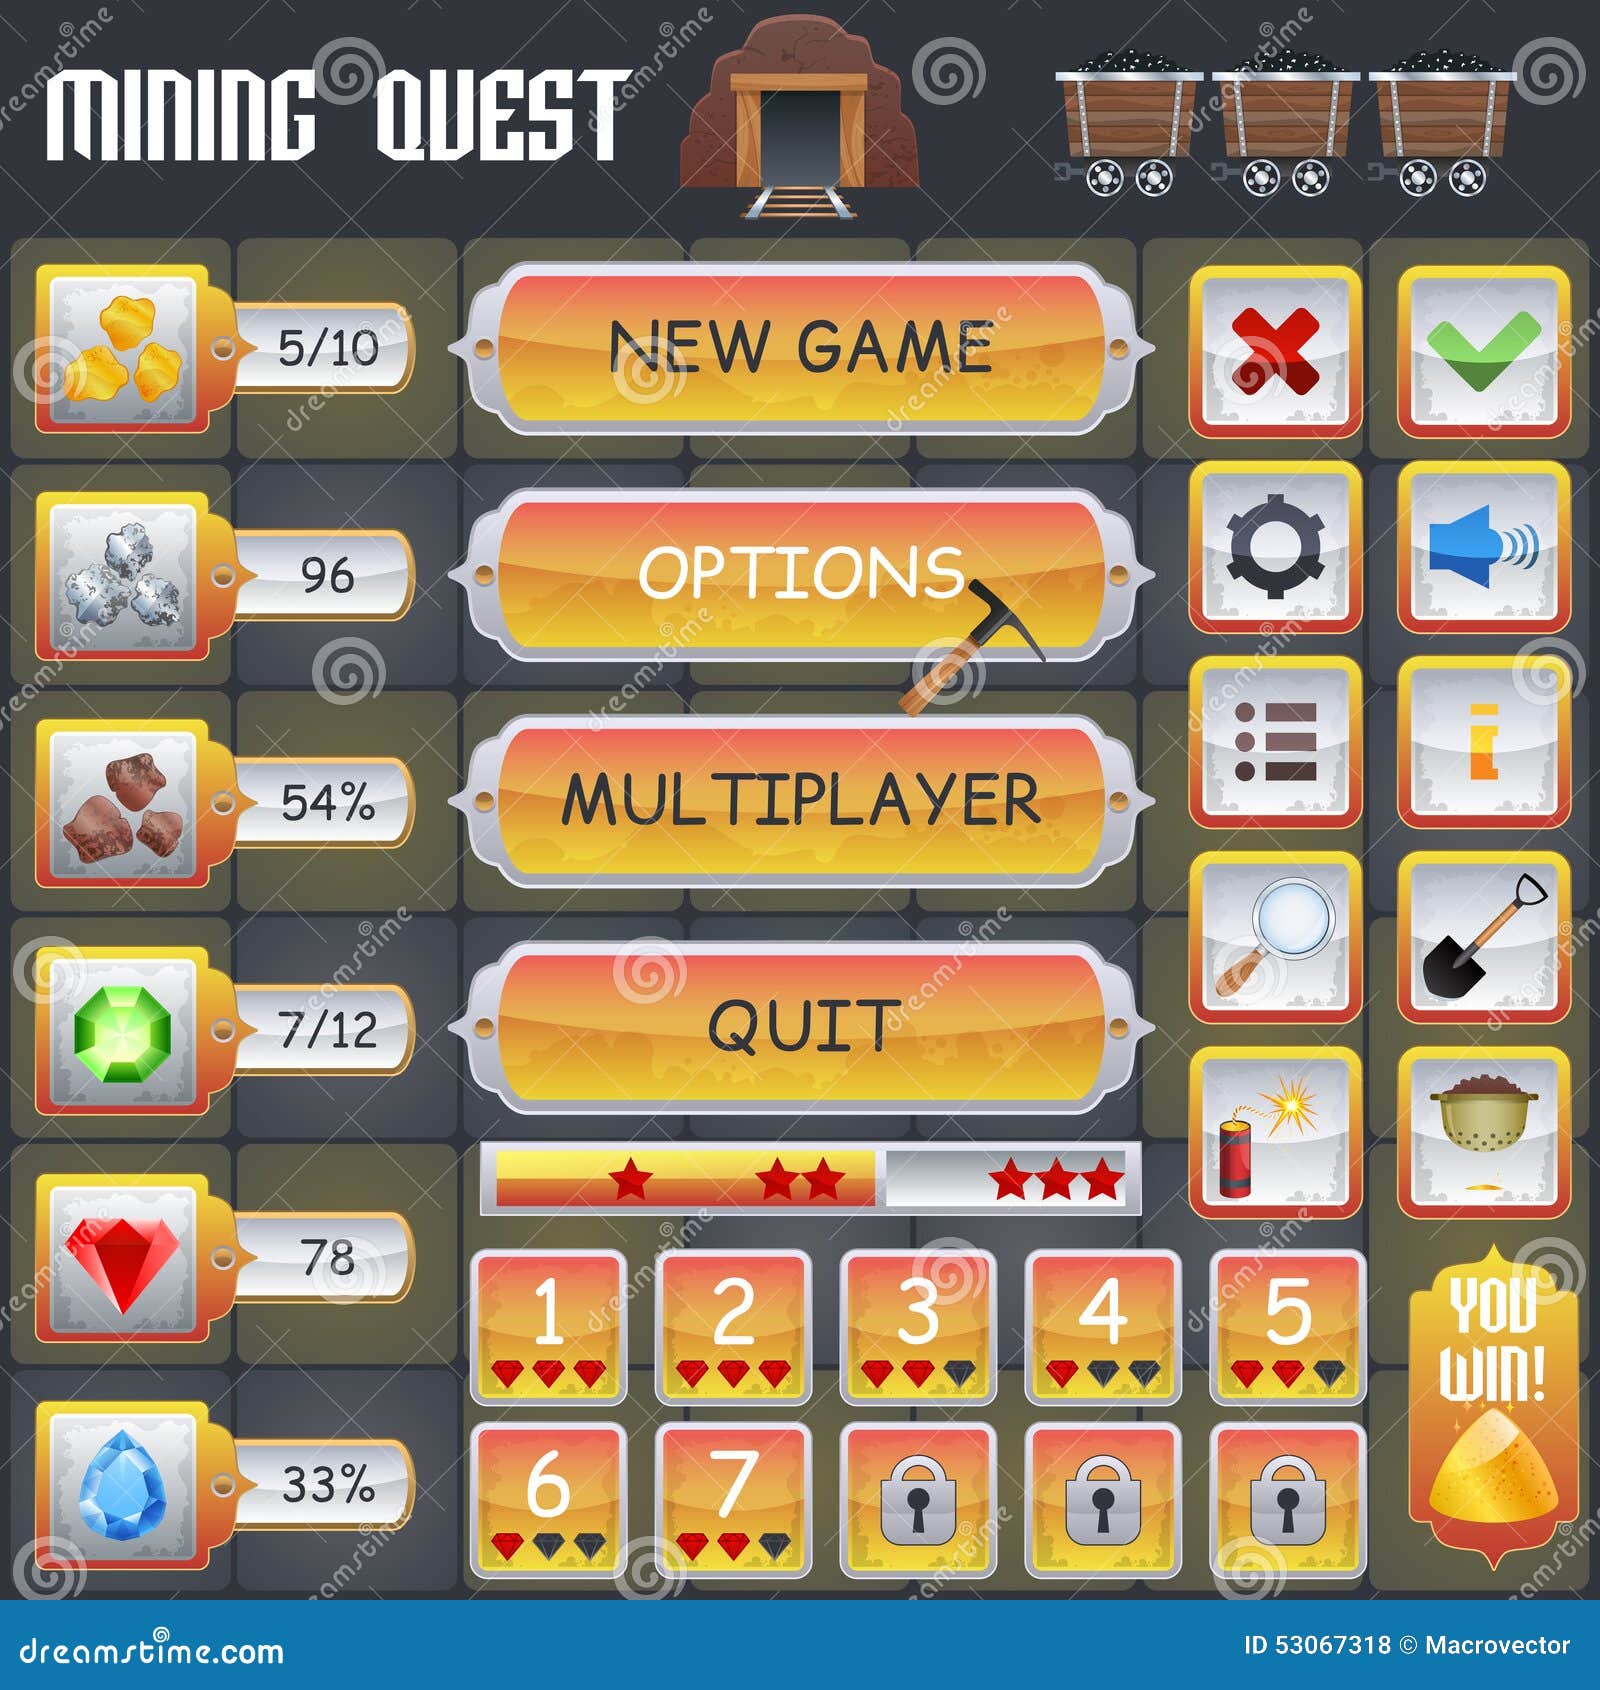 Mining game ideas? - Game Design and Theory 